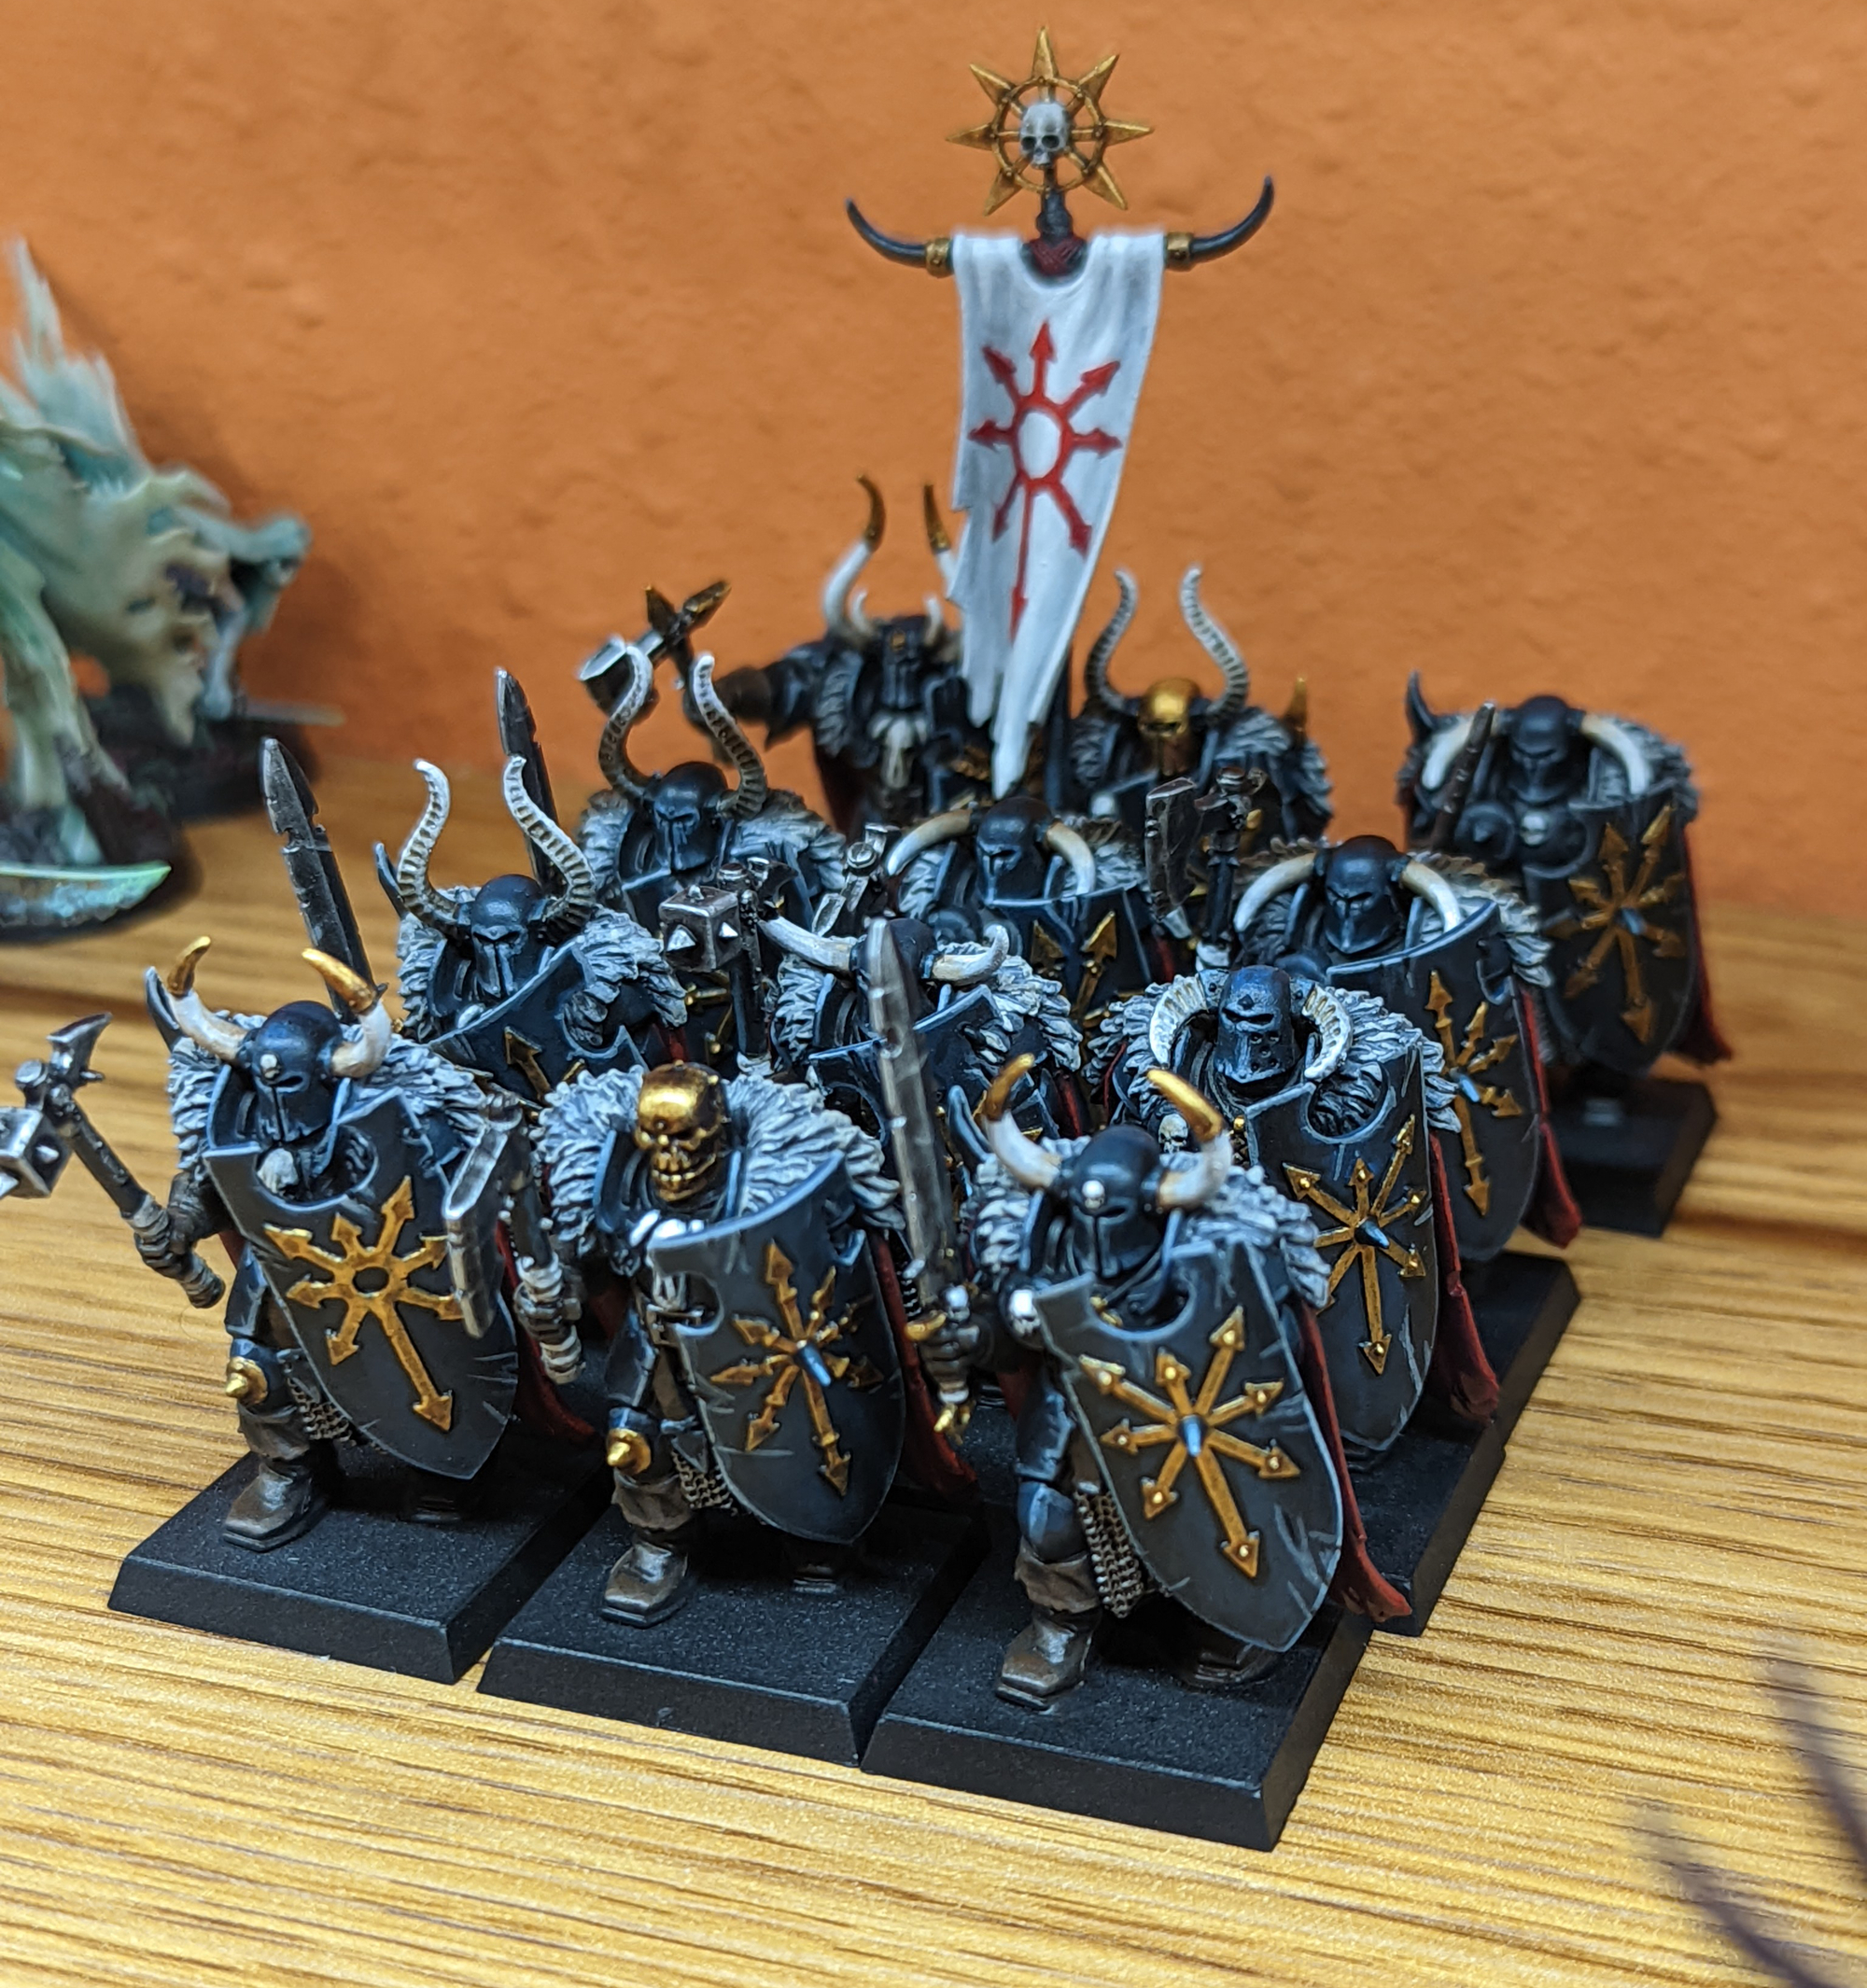 A unit of Chaos Warriors